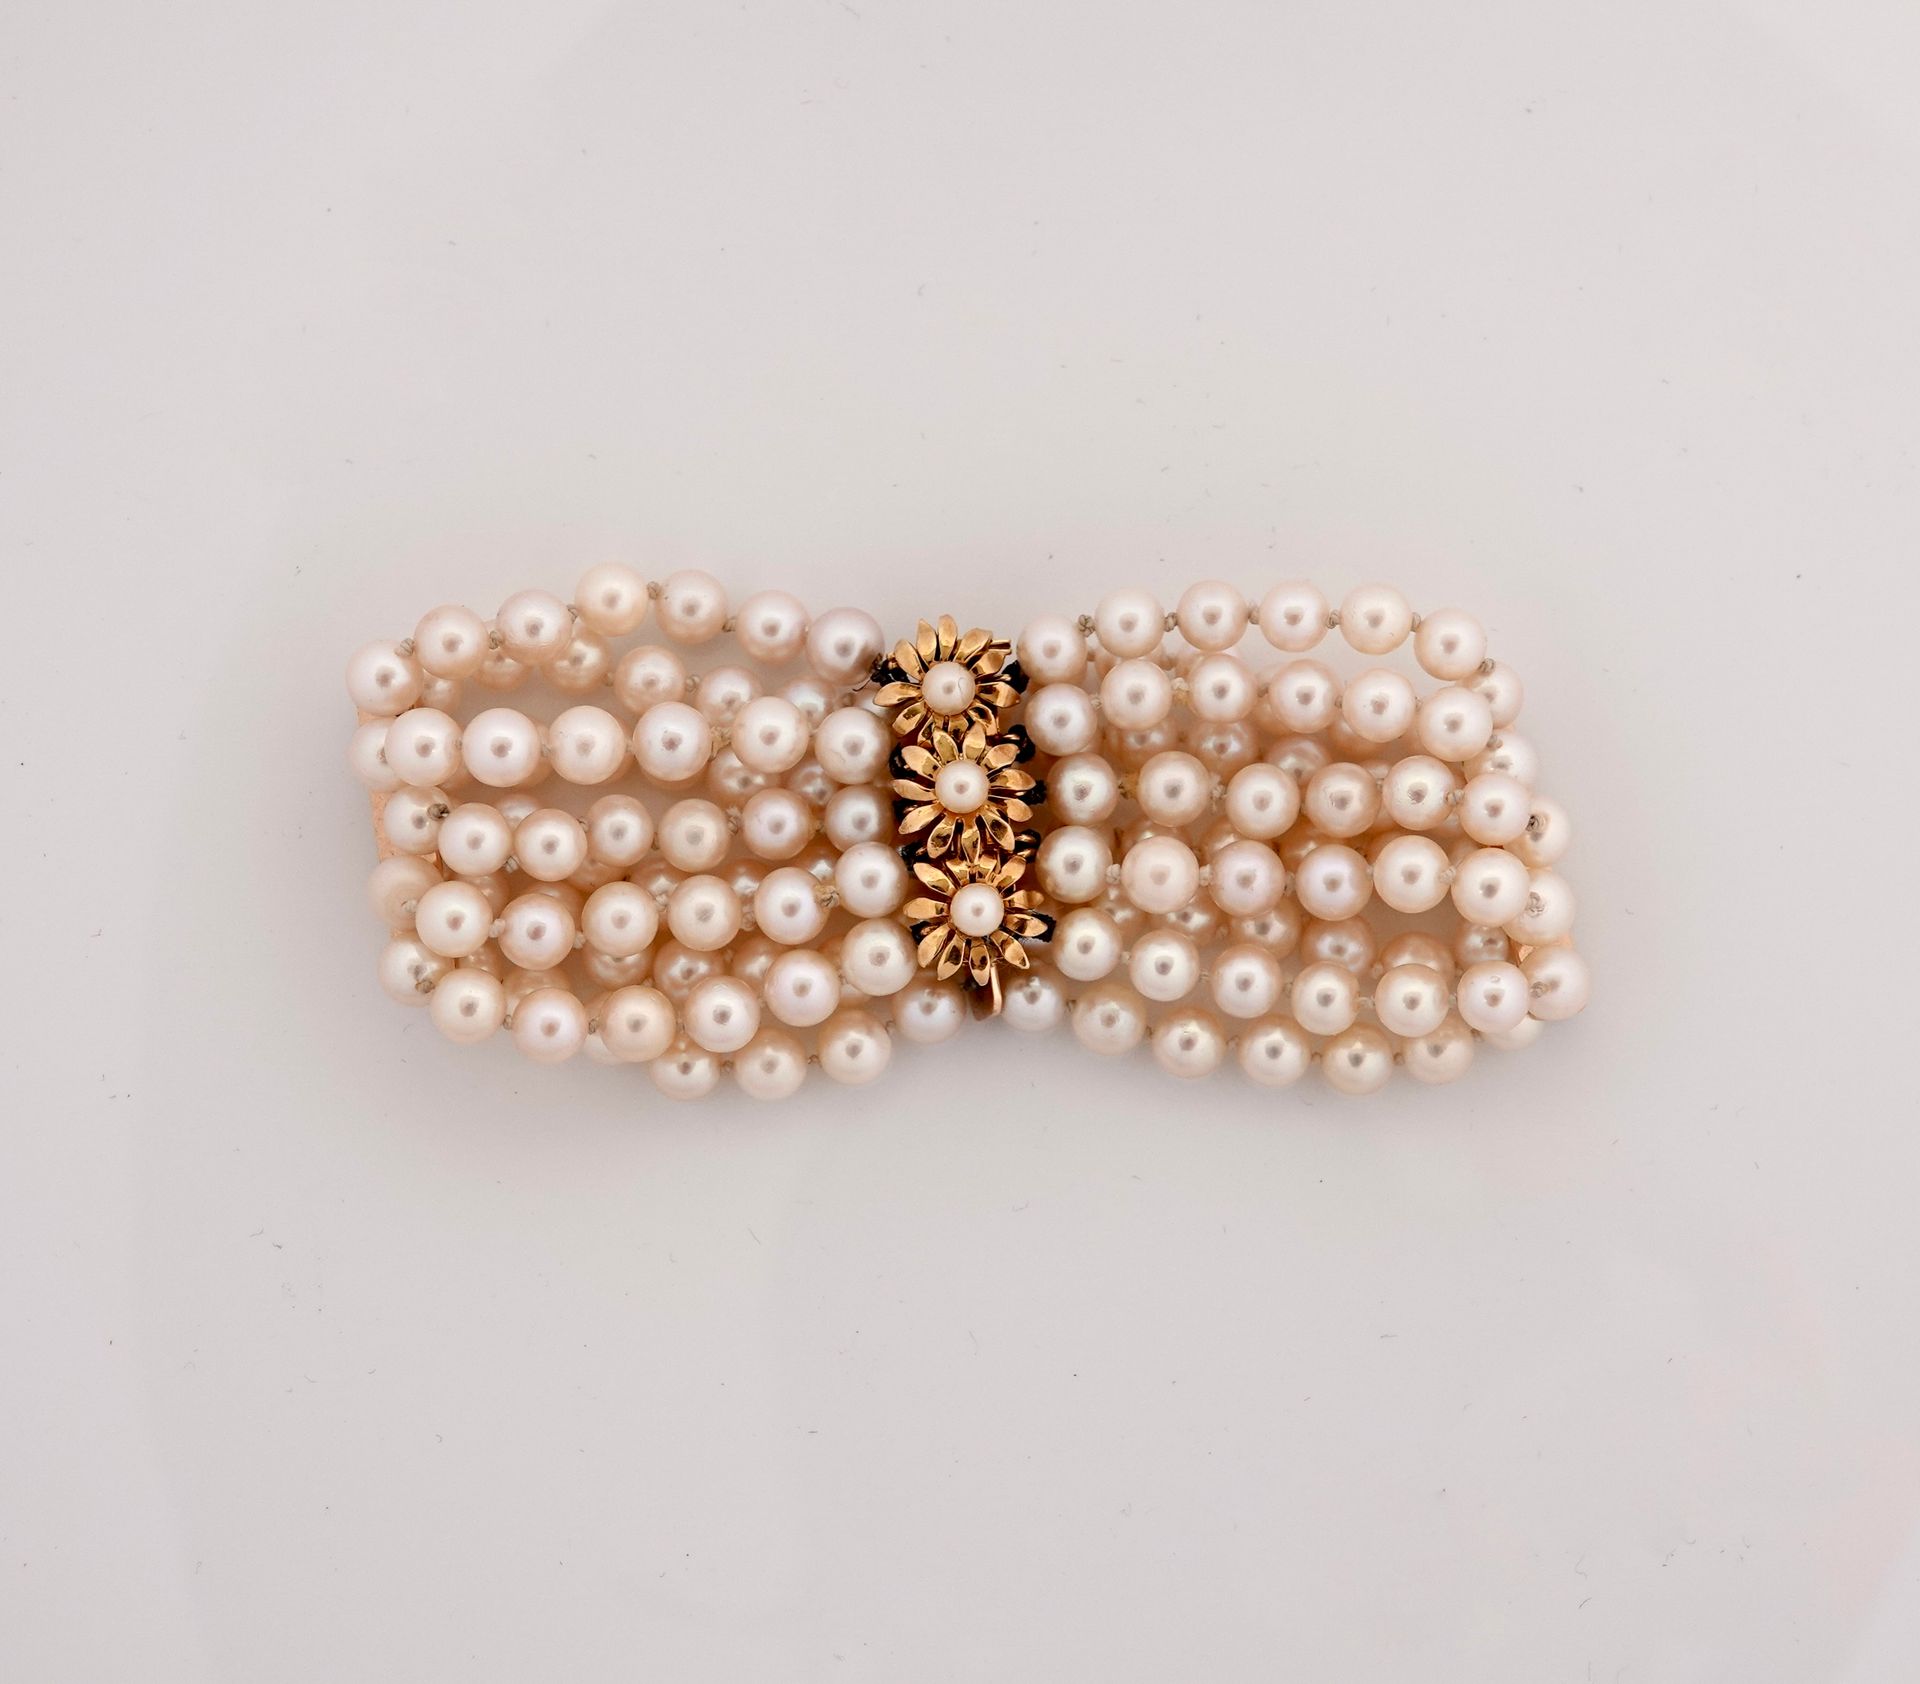 Null Cuff bracelet formed of five rows of cultured pearls, diameter 5 / 5.5 mm, &hellip;